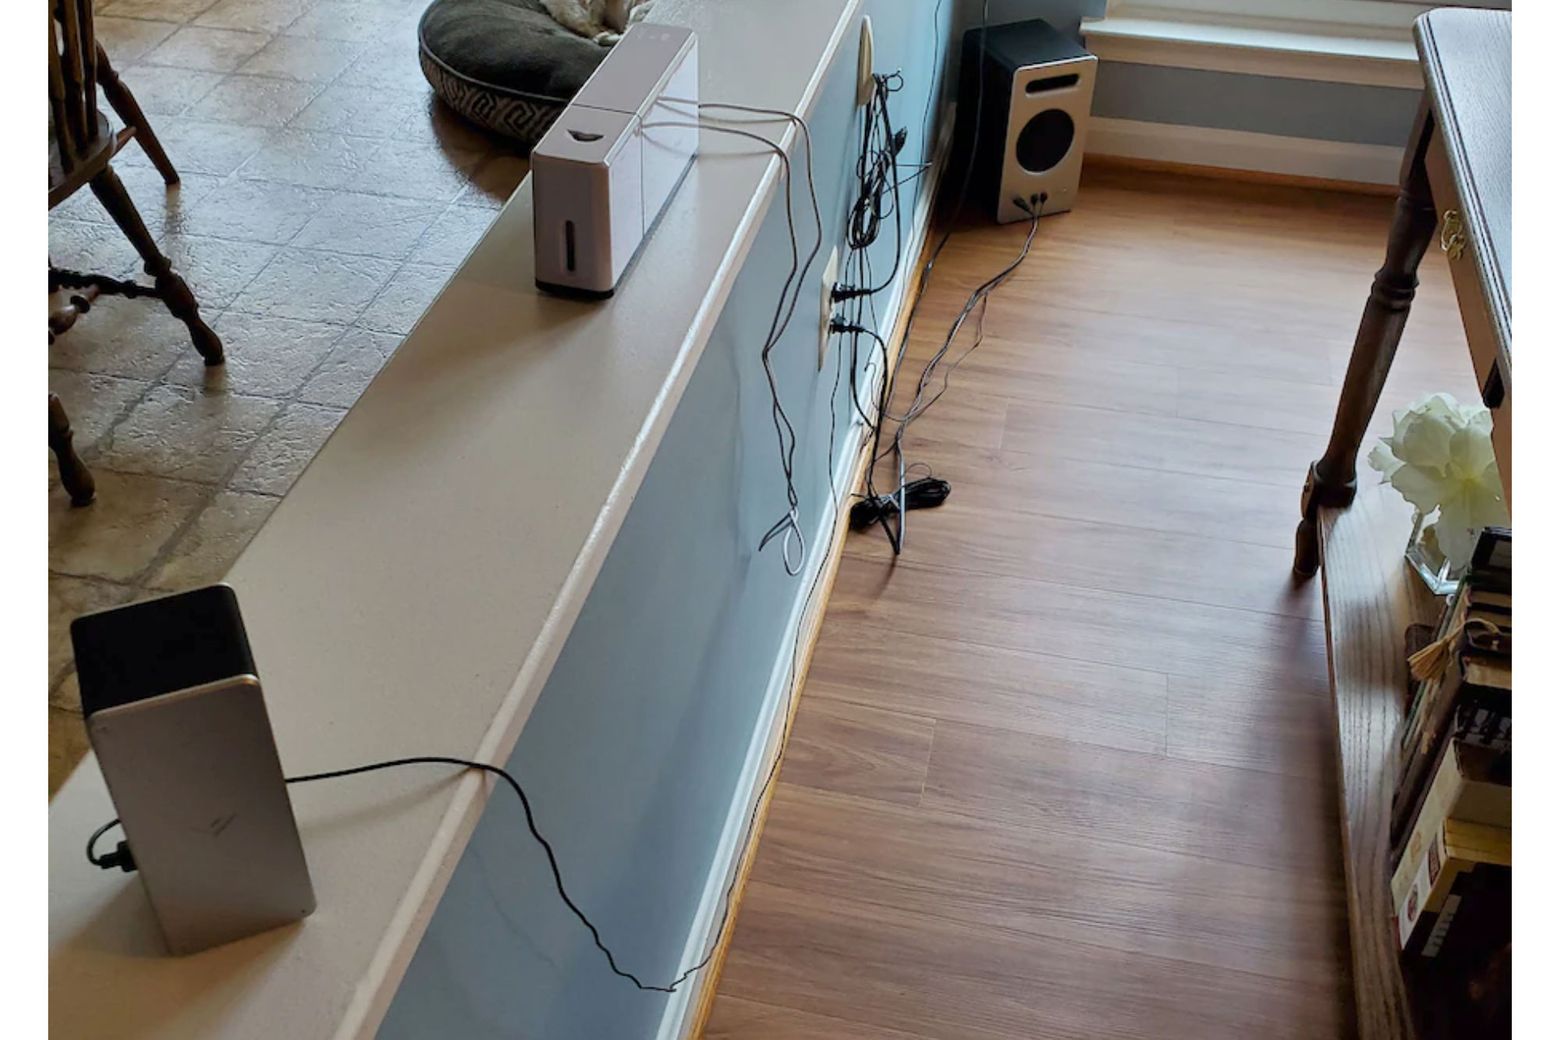 cable management - Use baseboard to conceal wires? - Home